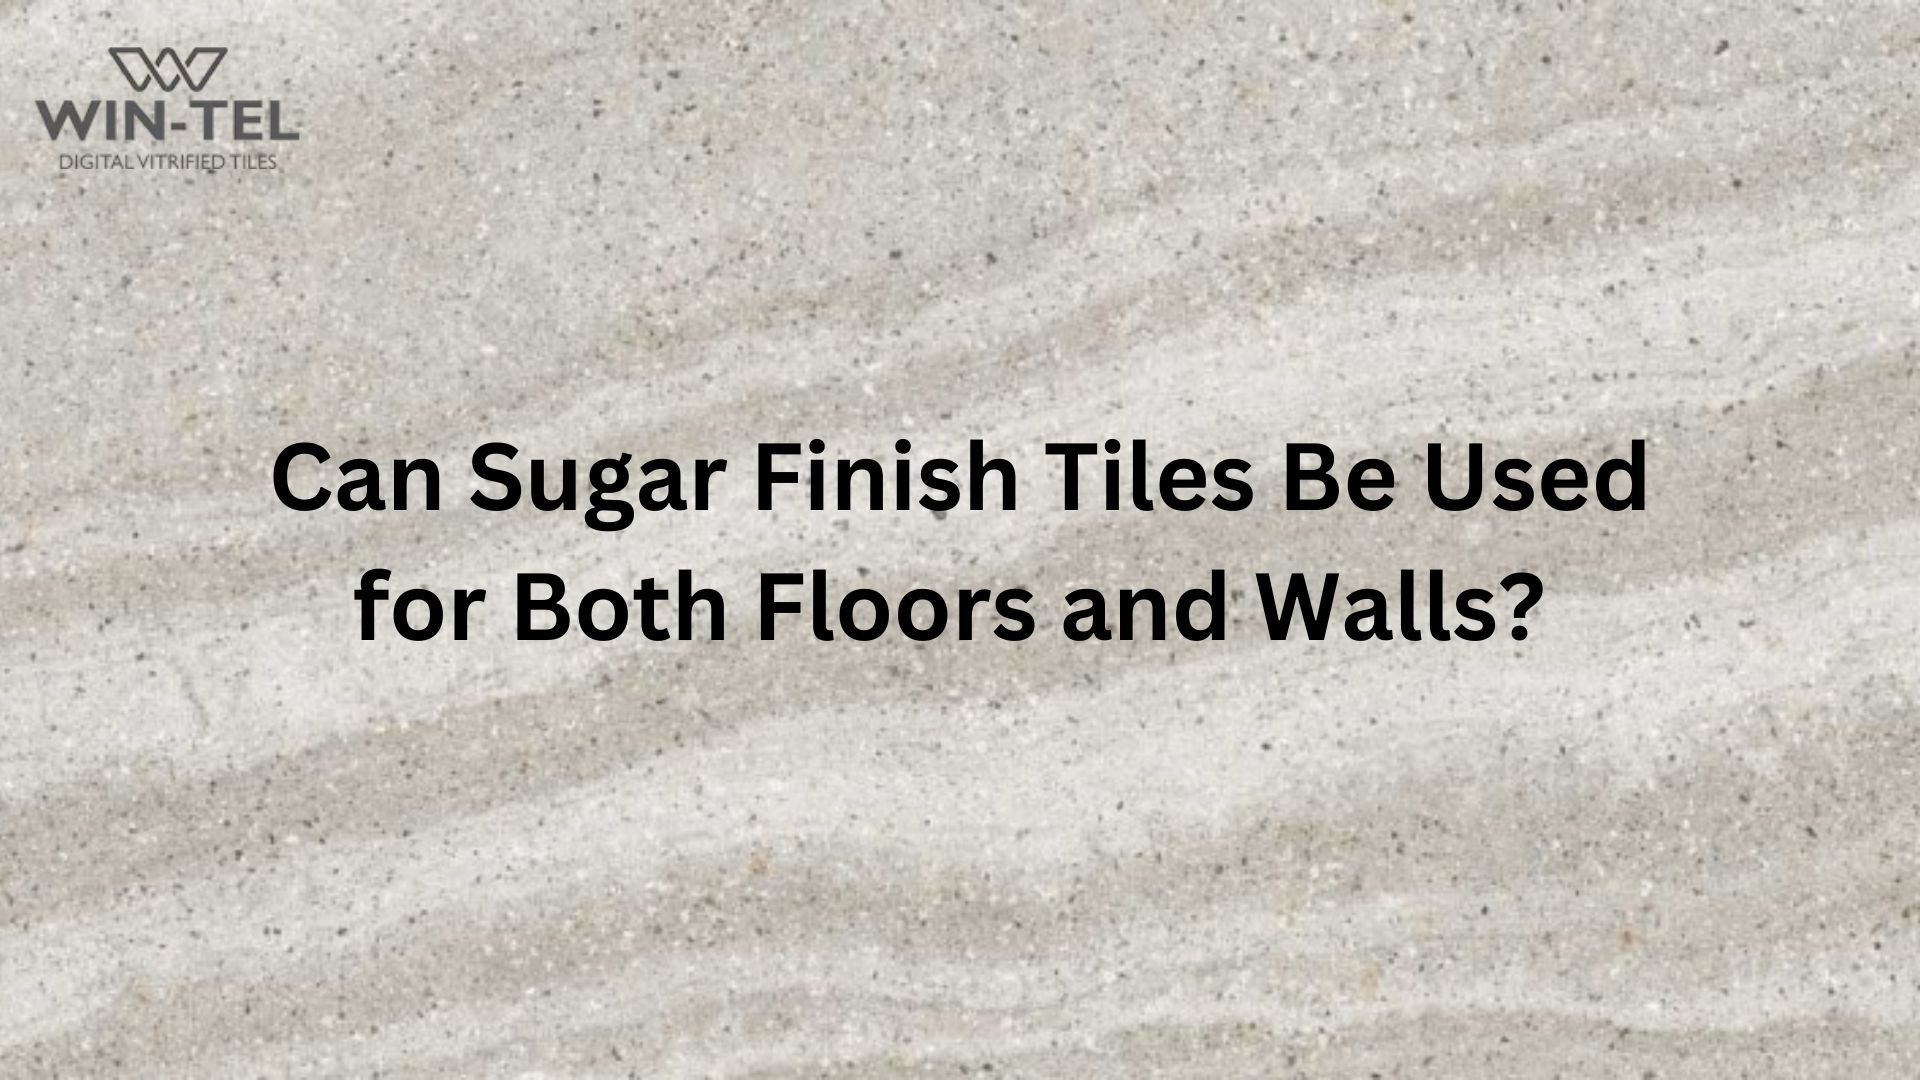 Can Sugar Finish Tiles Be Used For Both Floors And Walls?